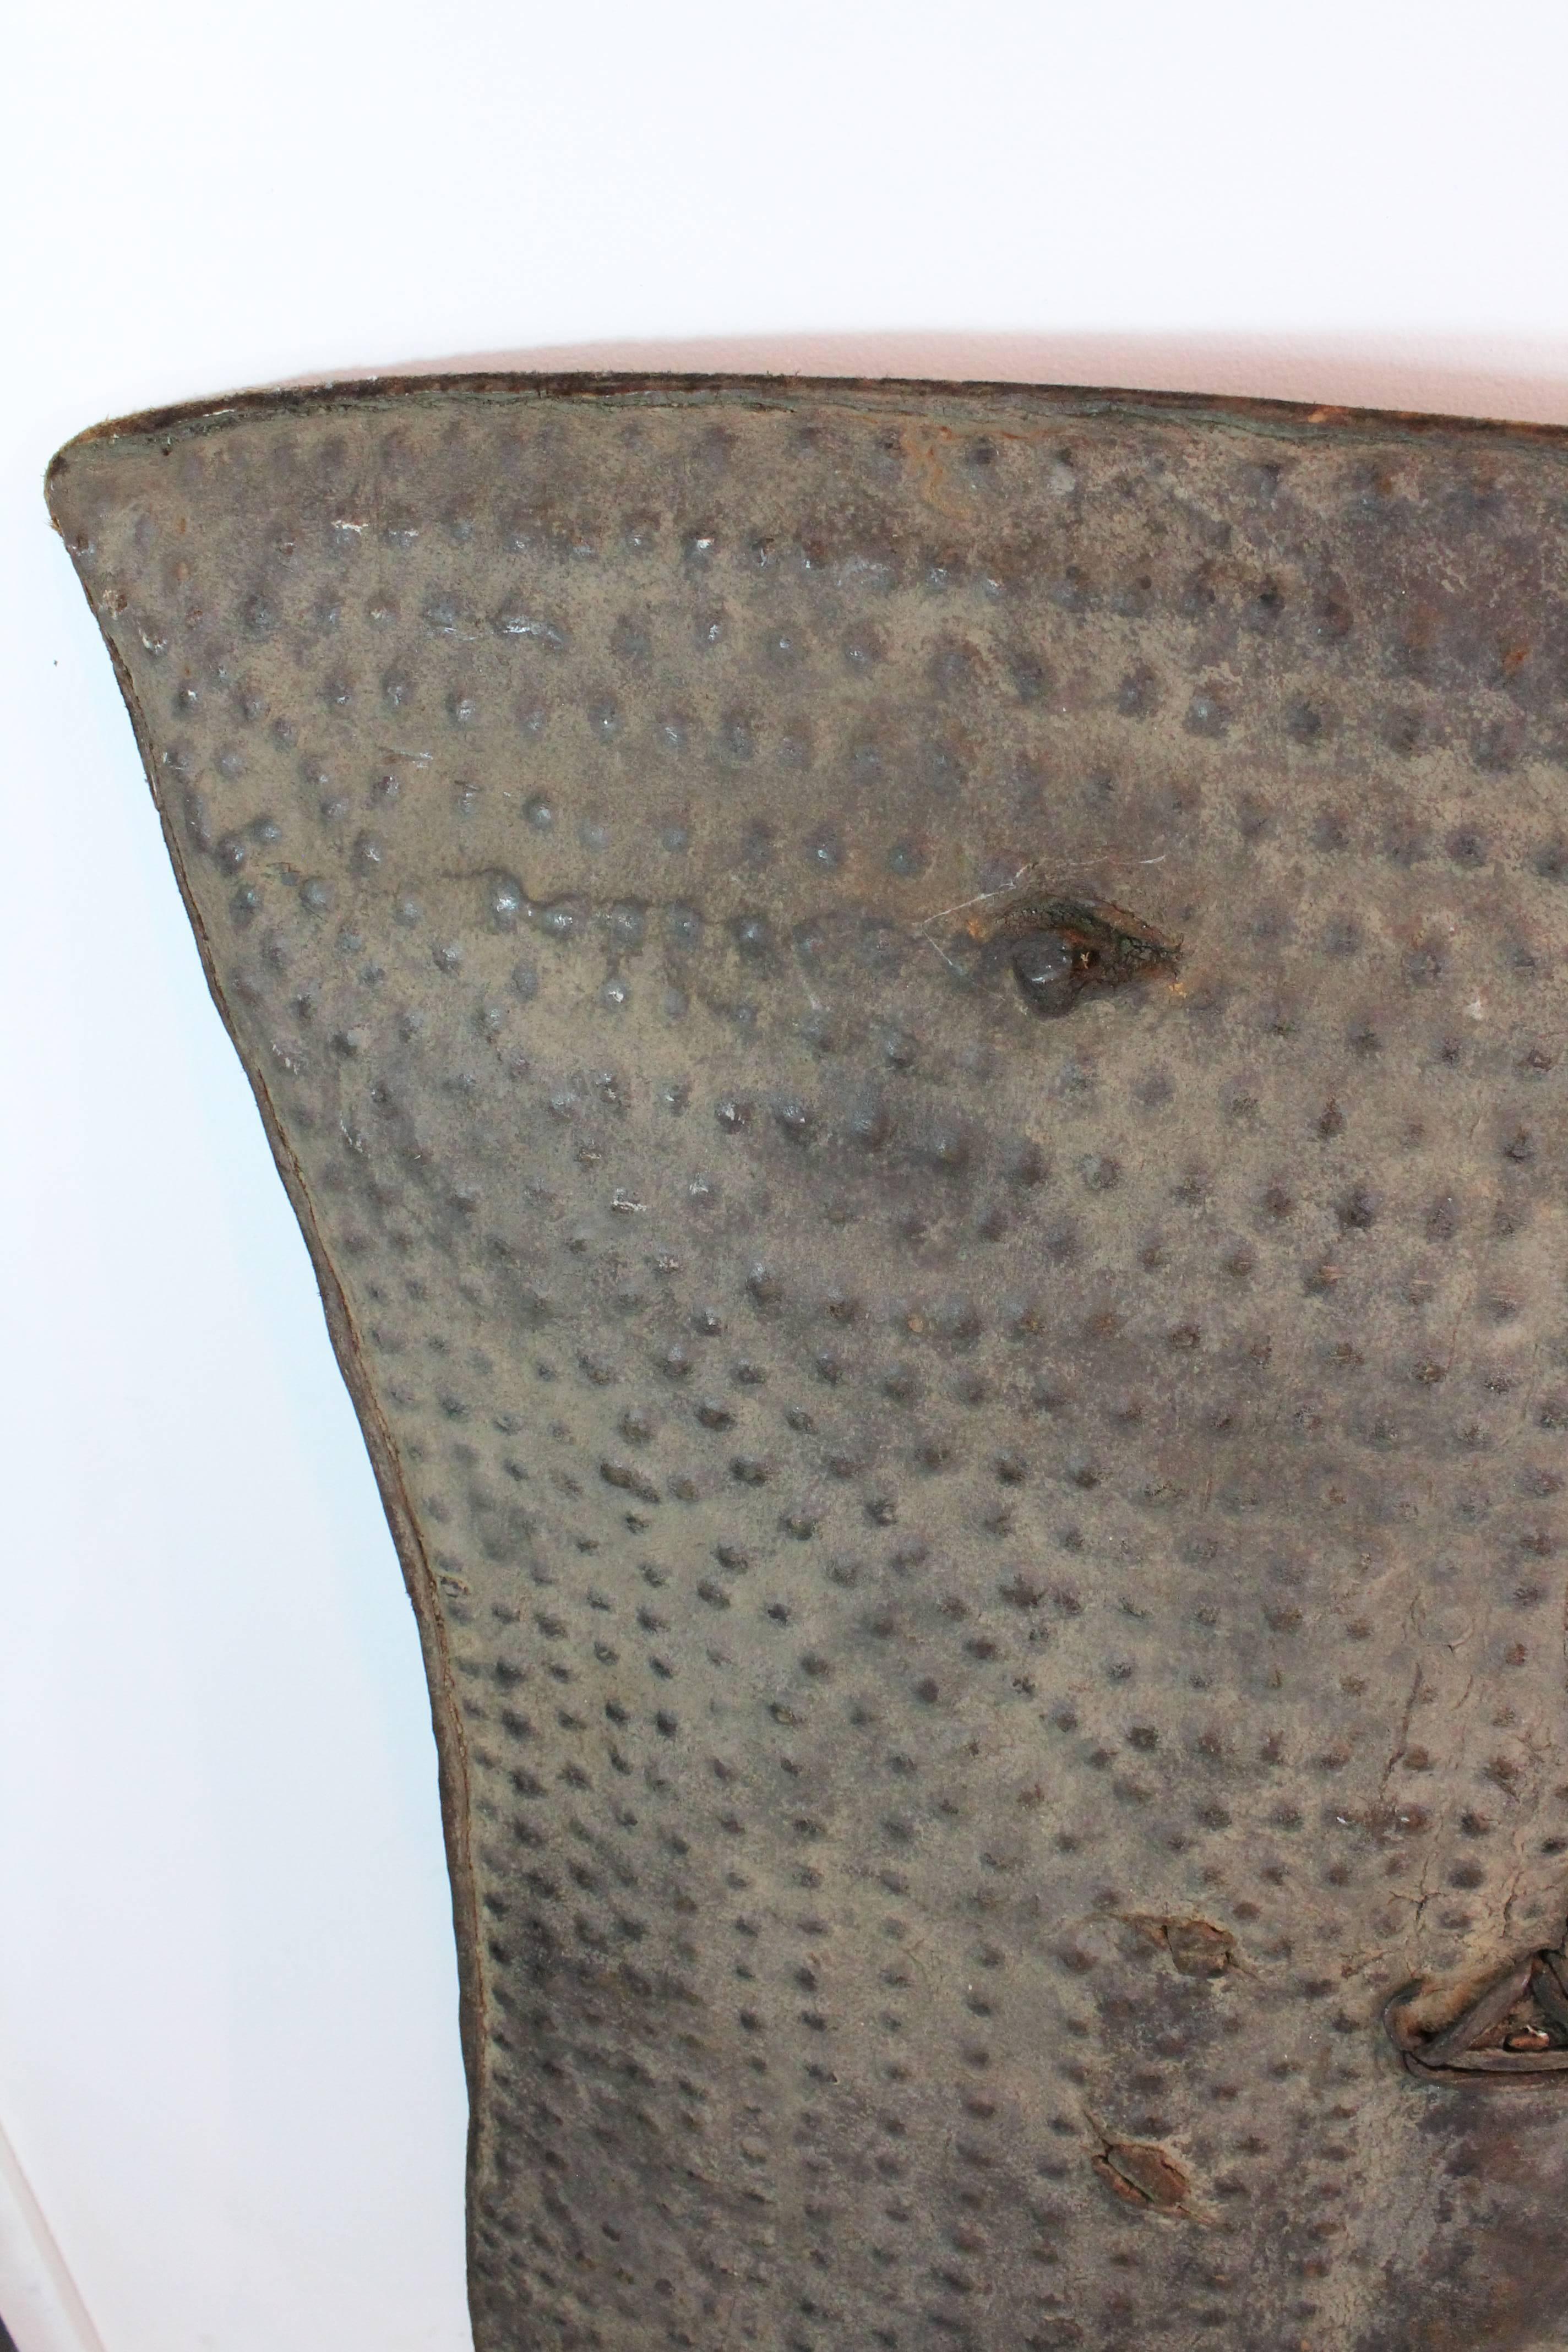 Powerful graphic large-scale embossed thick hide shield.
Excellent patina, age and usage on this thick hide shield from Ethiopia.
This beauty has battle wounds, there are two areas of old repair and a pierced section at the top.
Fantastic simple